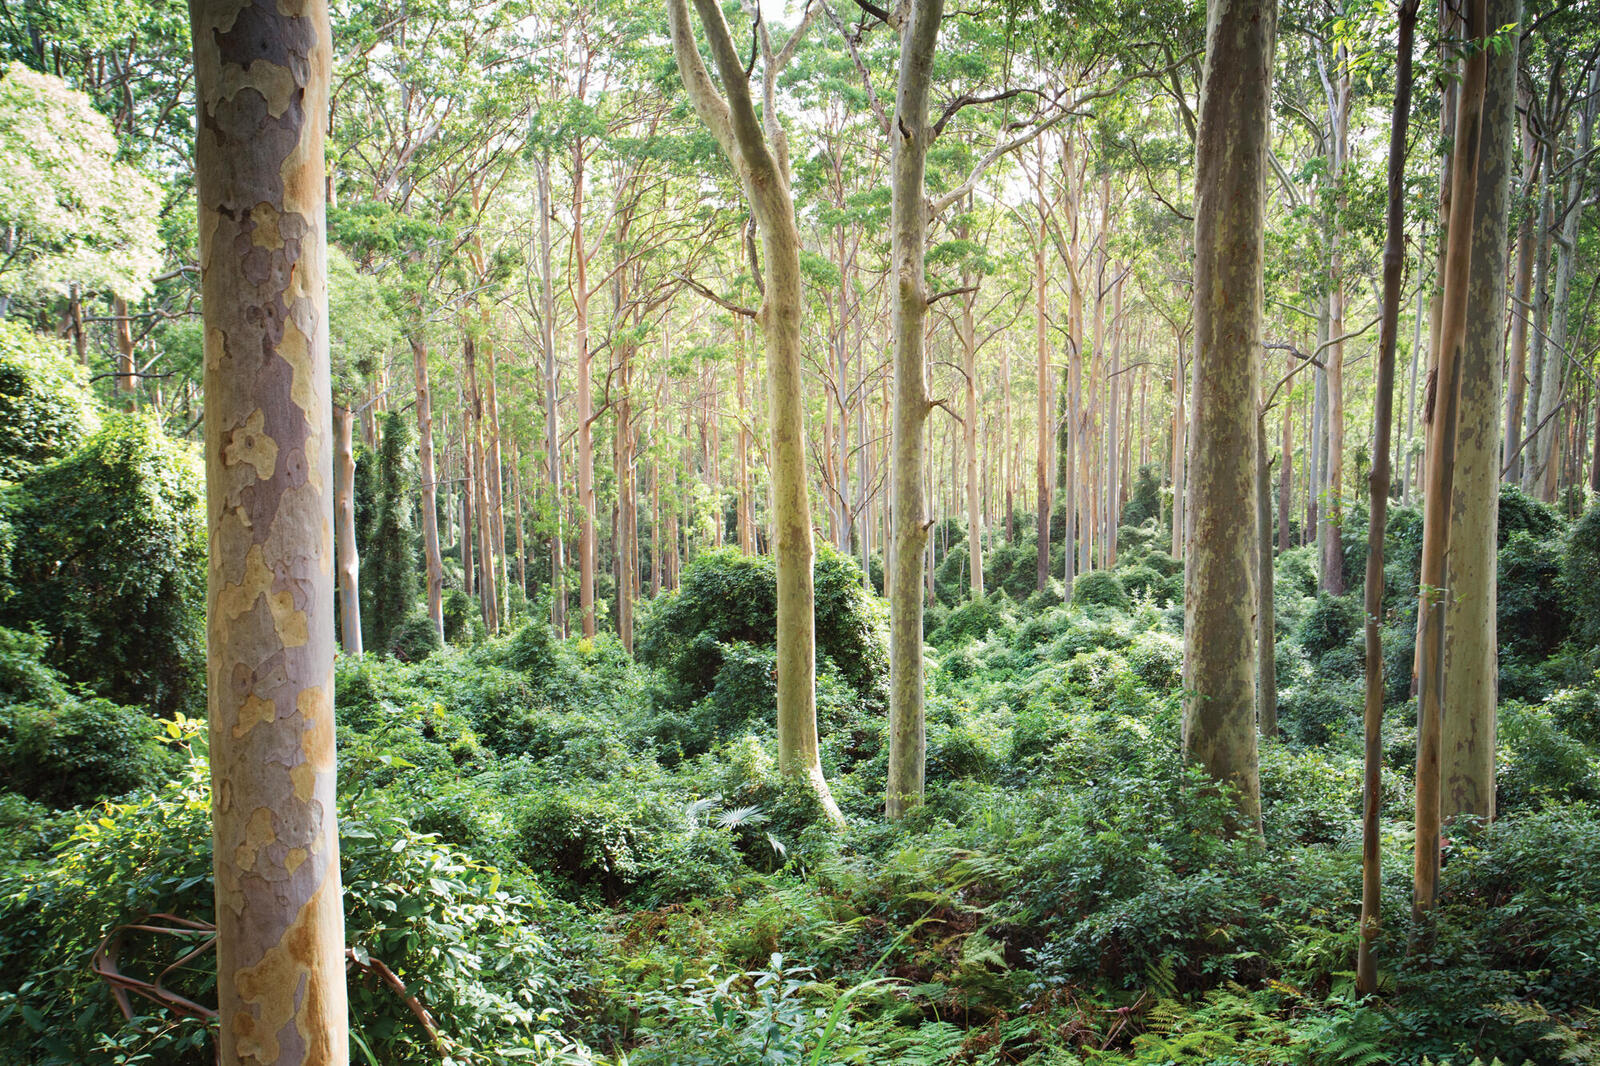 Trees in a eucalyptus forest